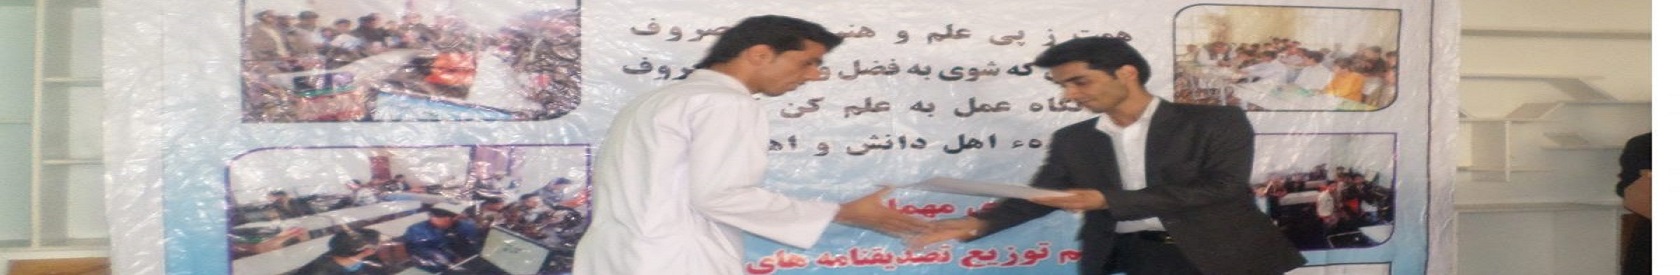 Graduation ceremony for the students of computer courses in Ghoriyan